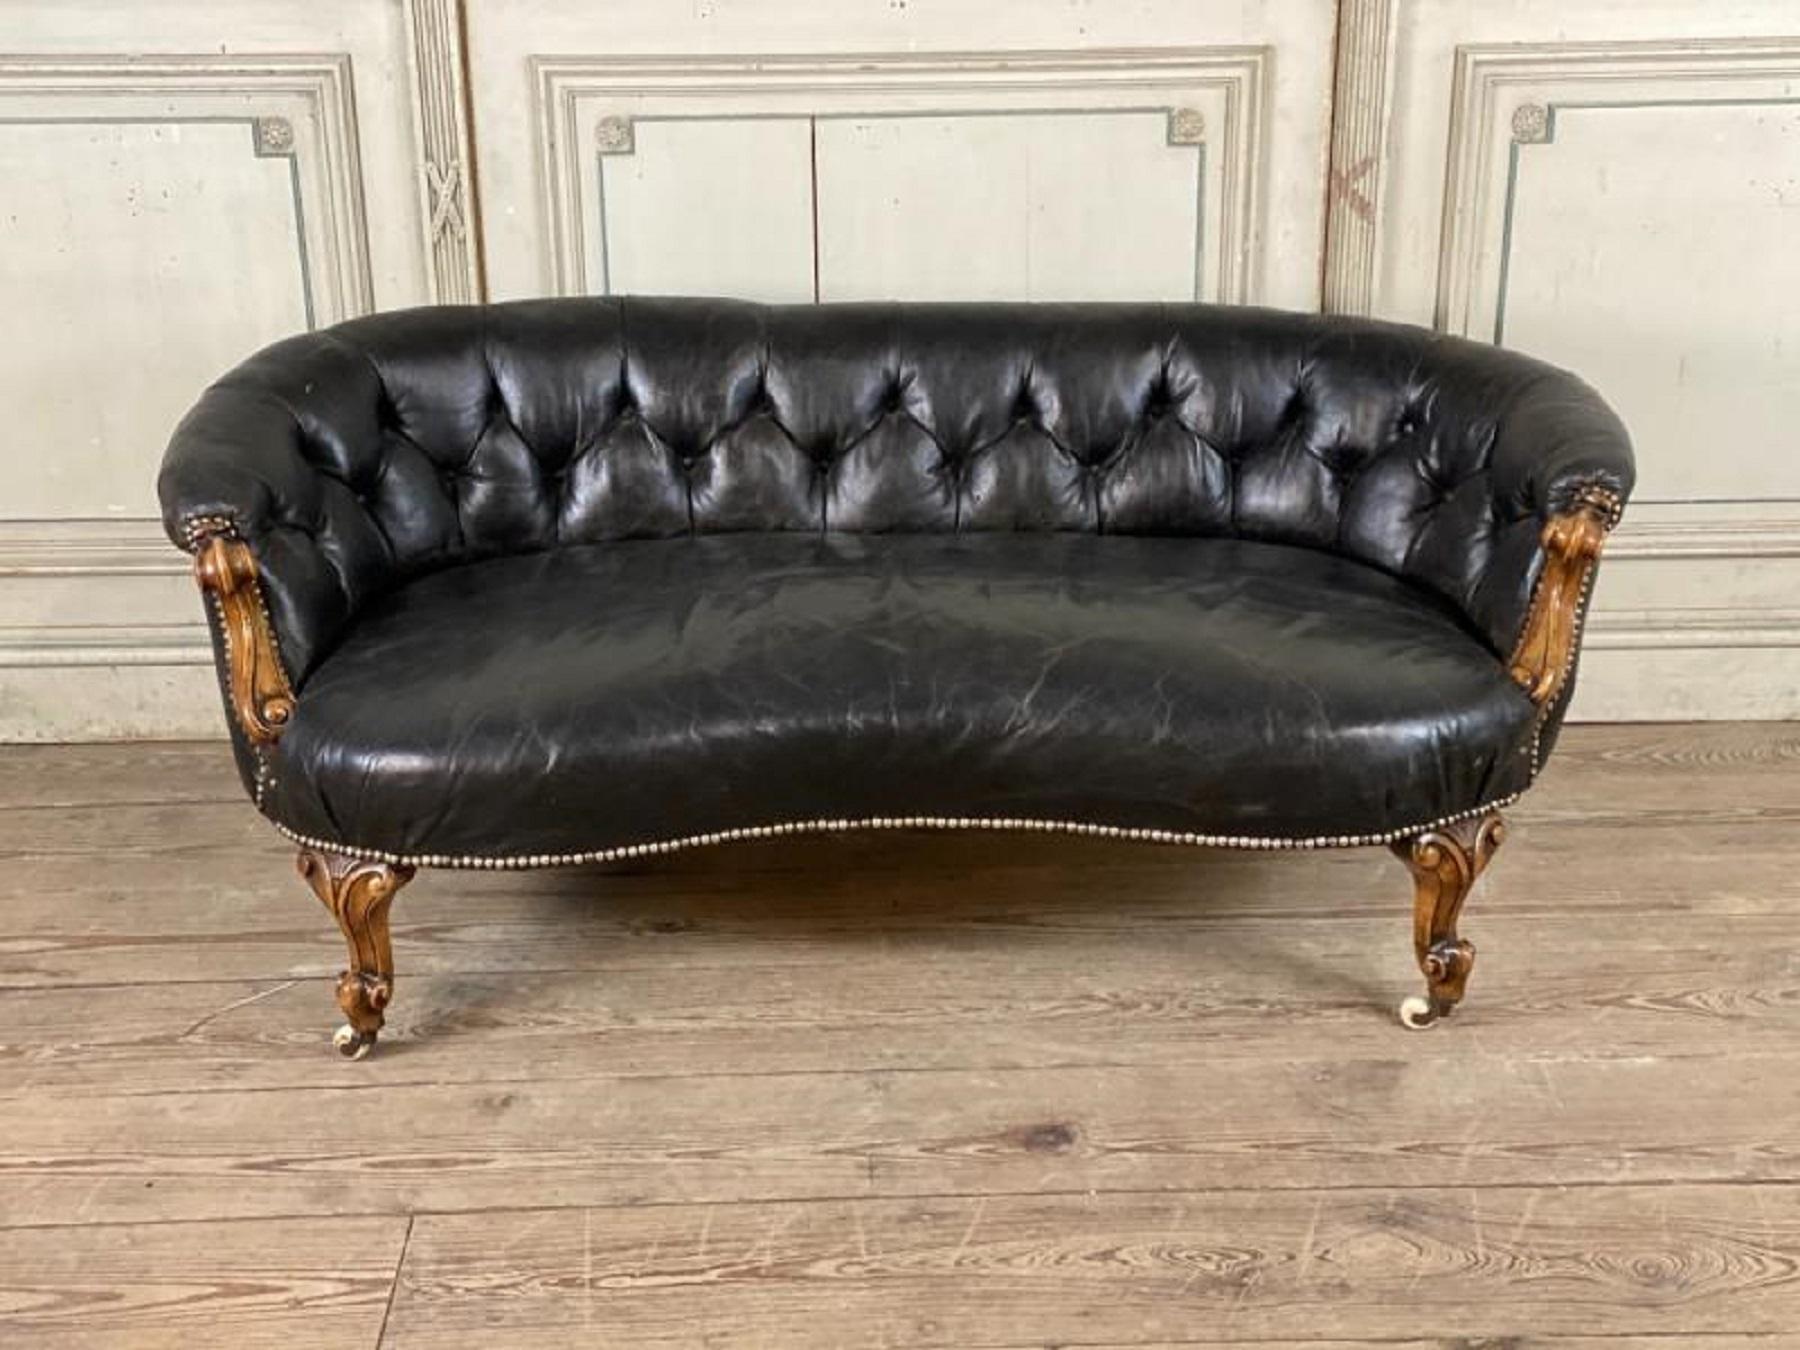 19th Century Curved Victorian Sofa, Carved Walnut and Leather